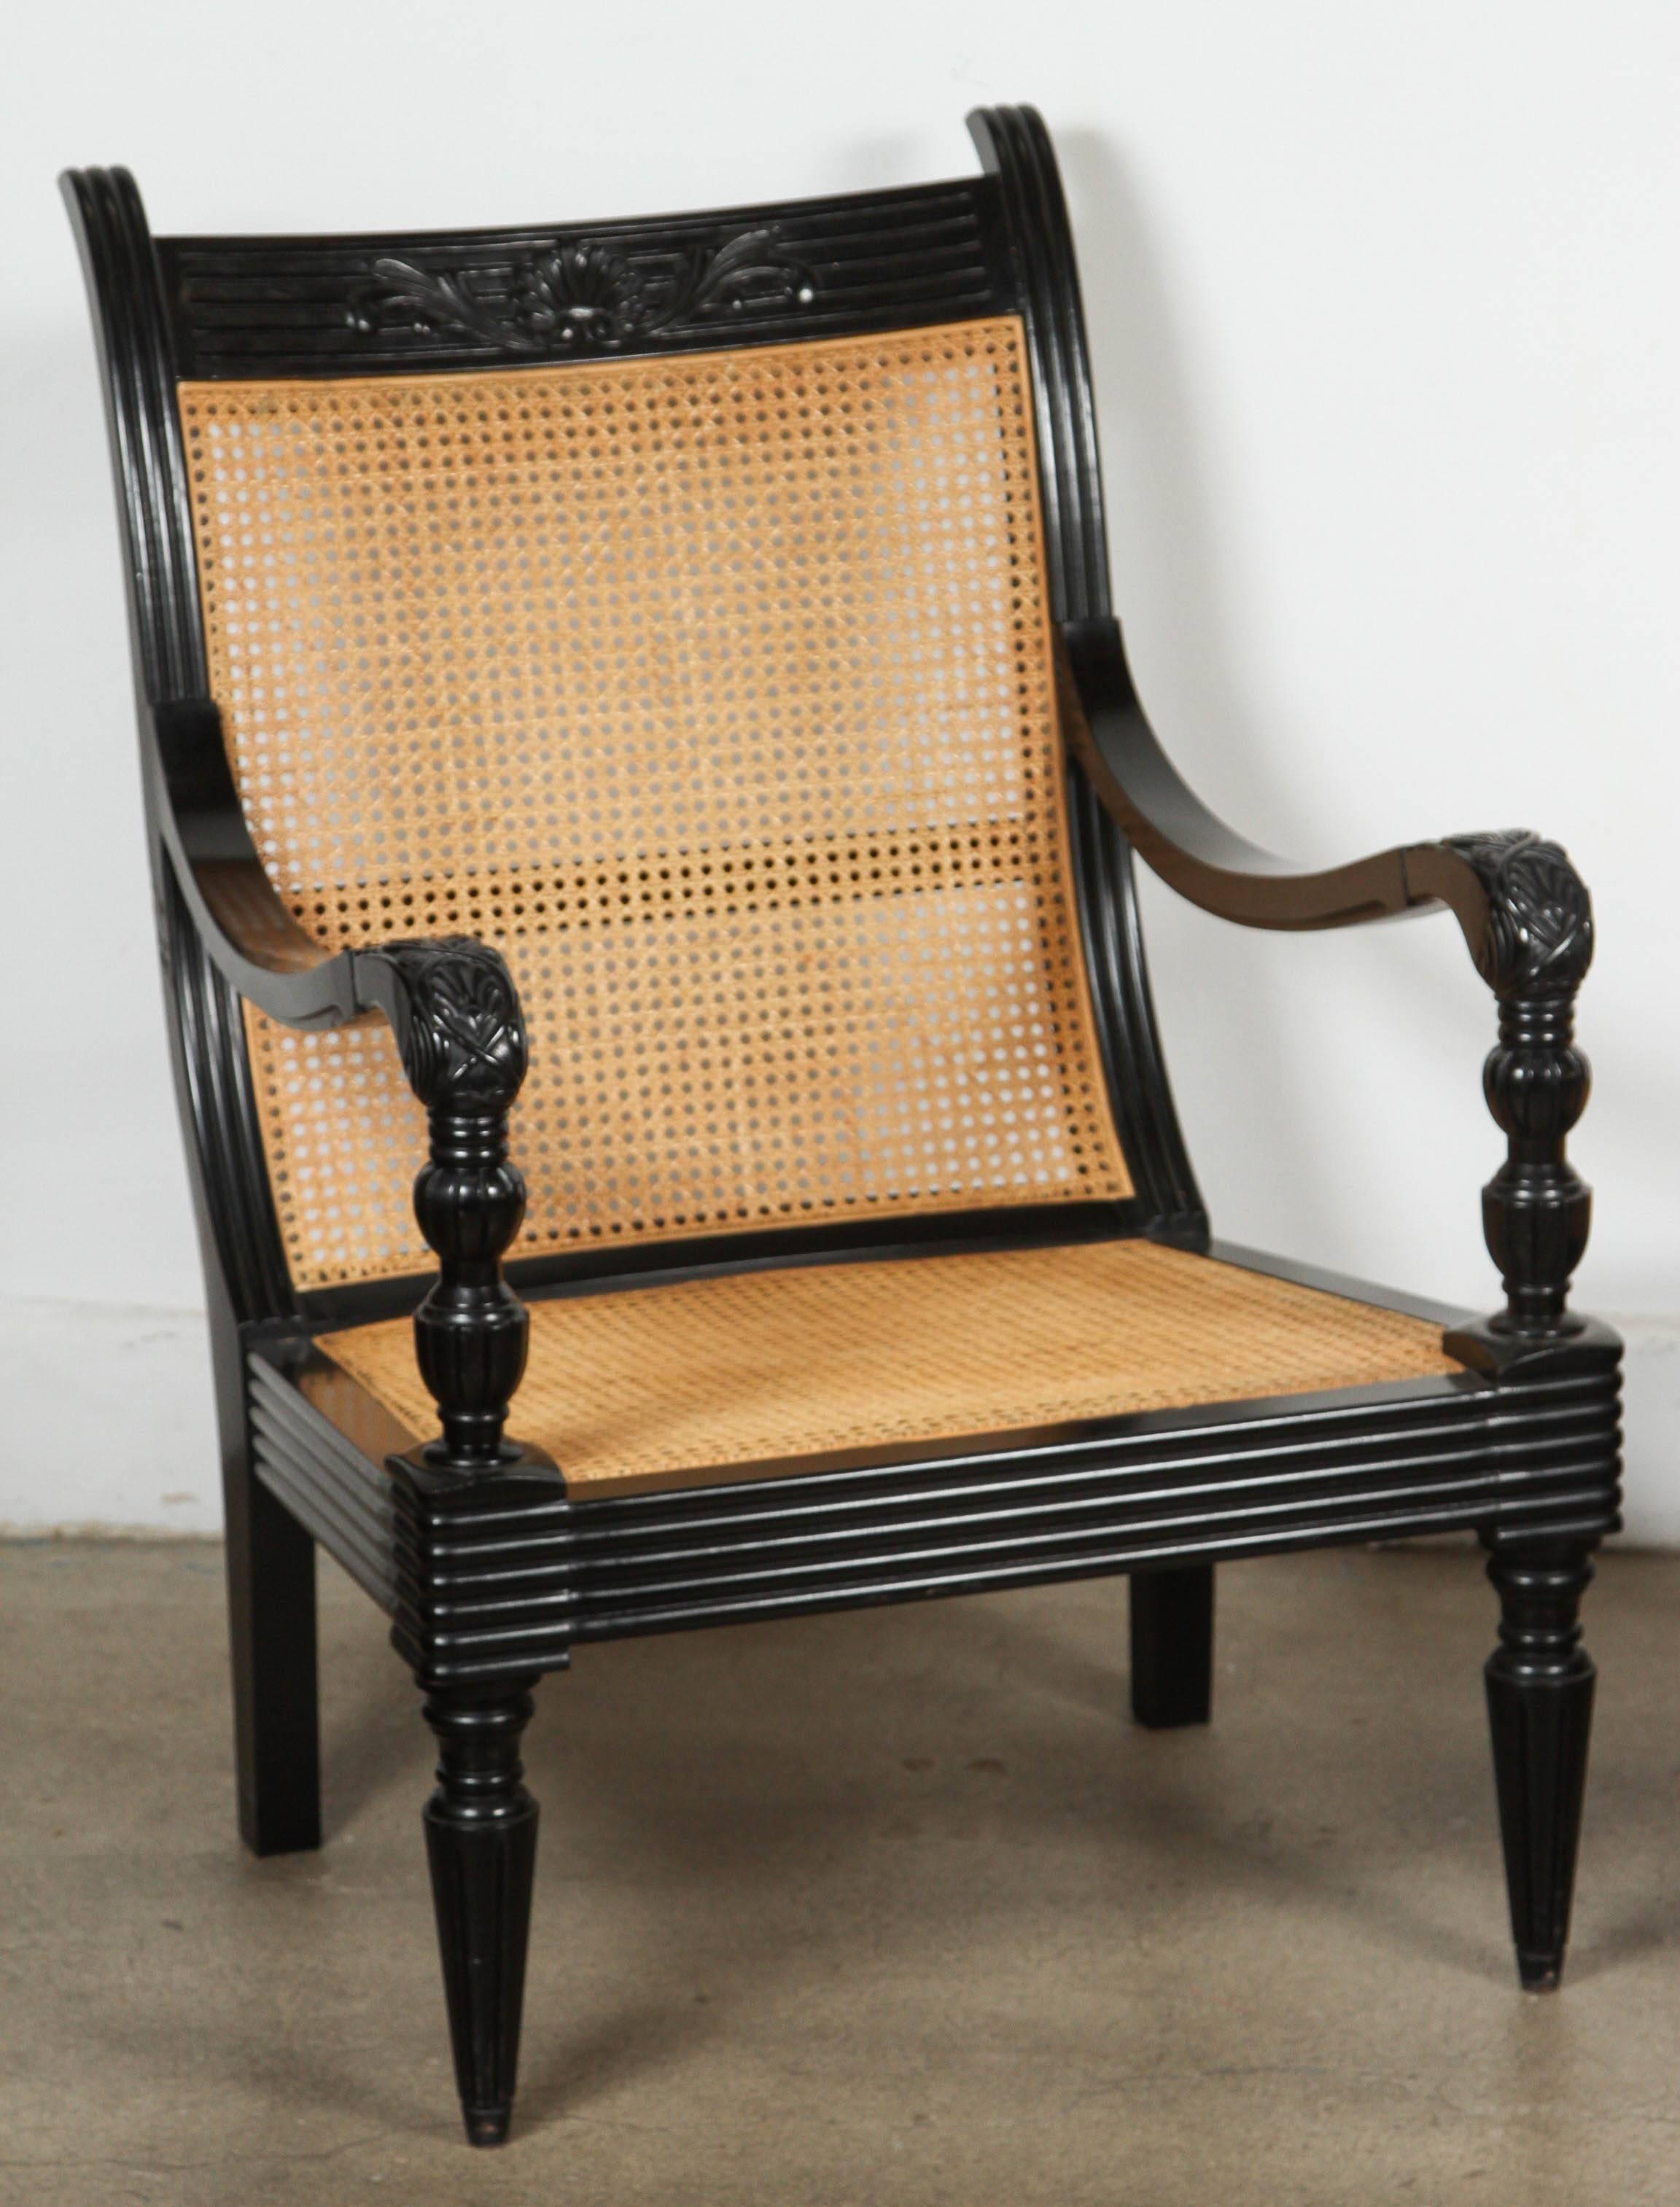 Beautifully carved ebonized black lacquered Anglo-Indian armchair with cane and ottoman or side table.
Carved foliage on the backrest and arms.
Cane is in excellent condition. 
Ottoman size is: 26" x 26" x 26".